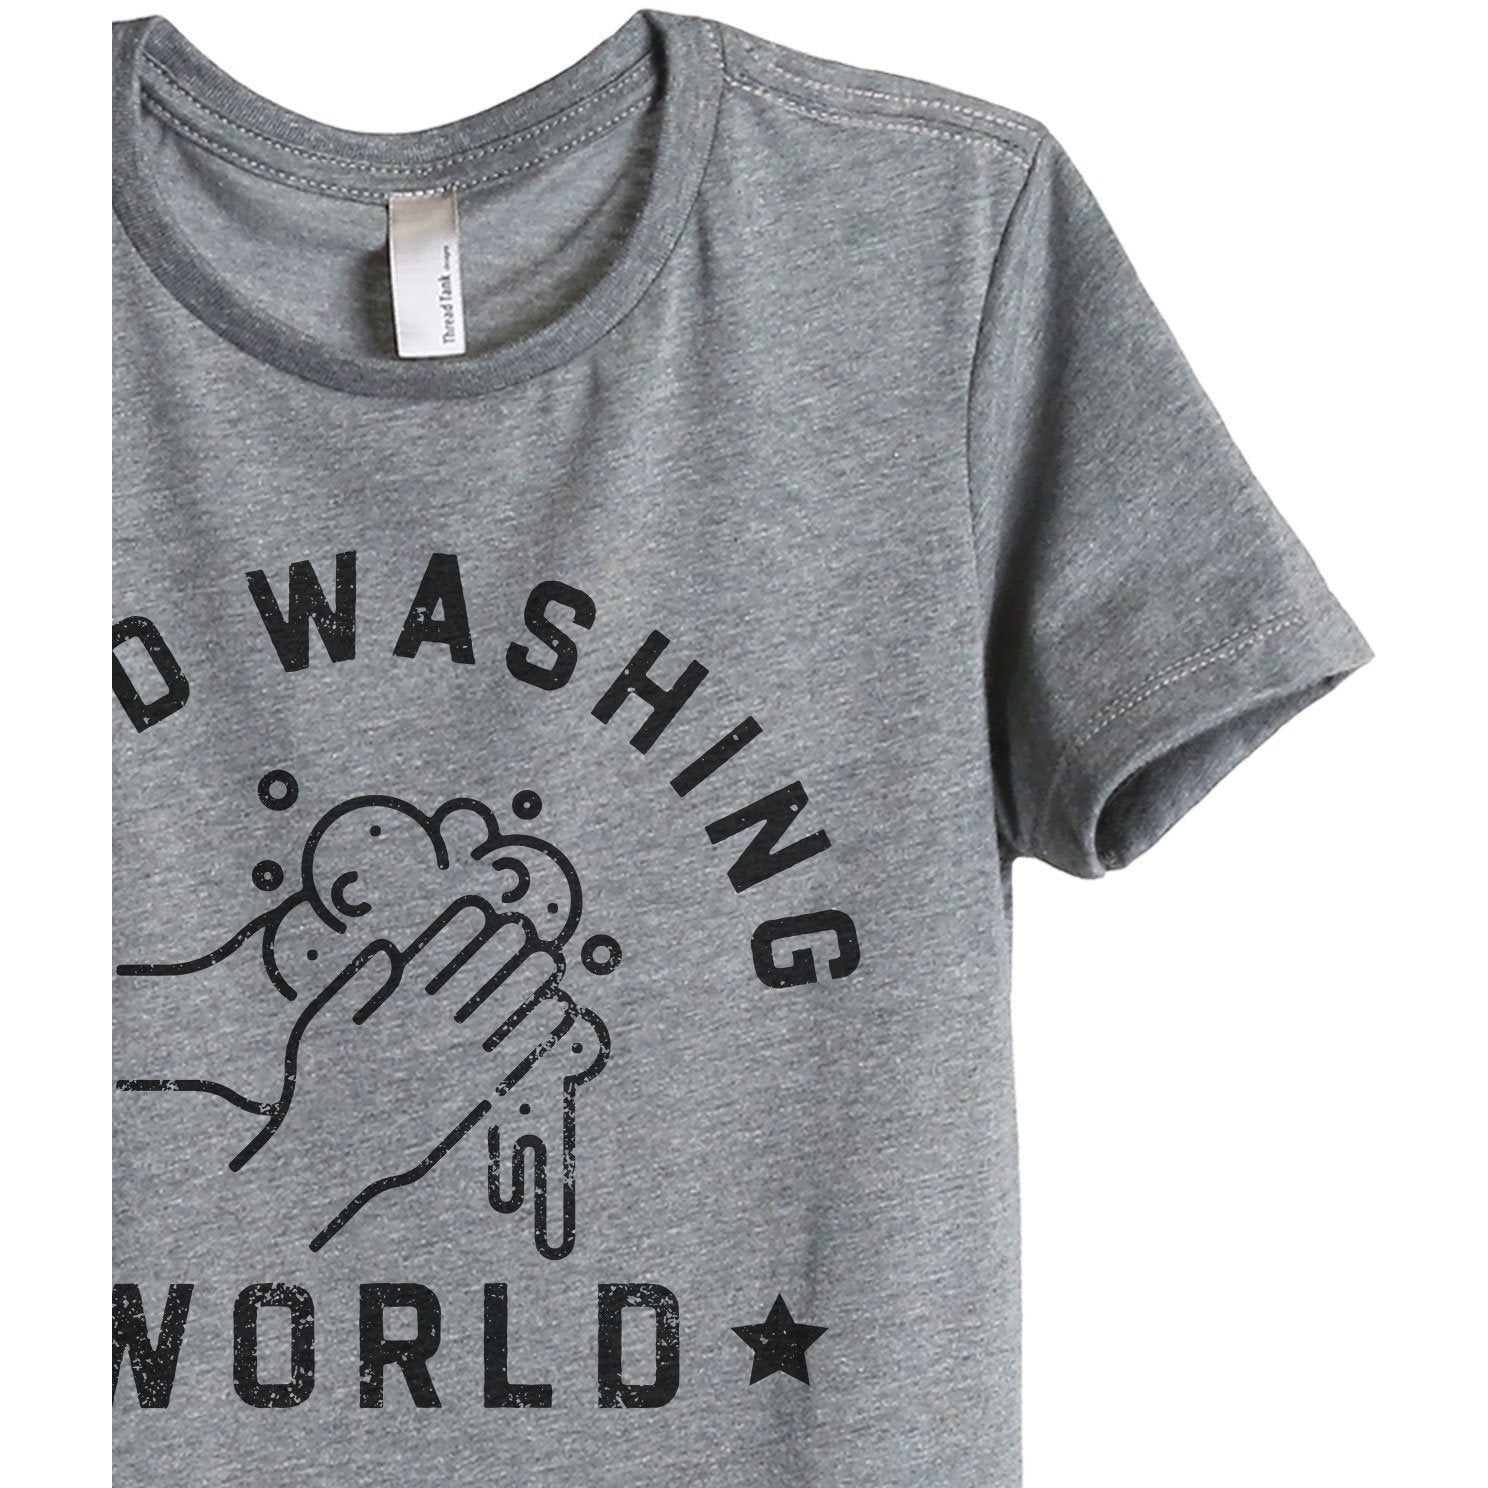 Hand Washing World Champion Women's Relaxed Crewneck T-Shirt Top Tee Heather Grey Zoom Details
